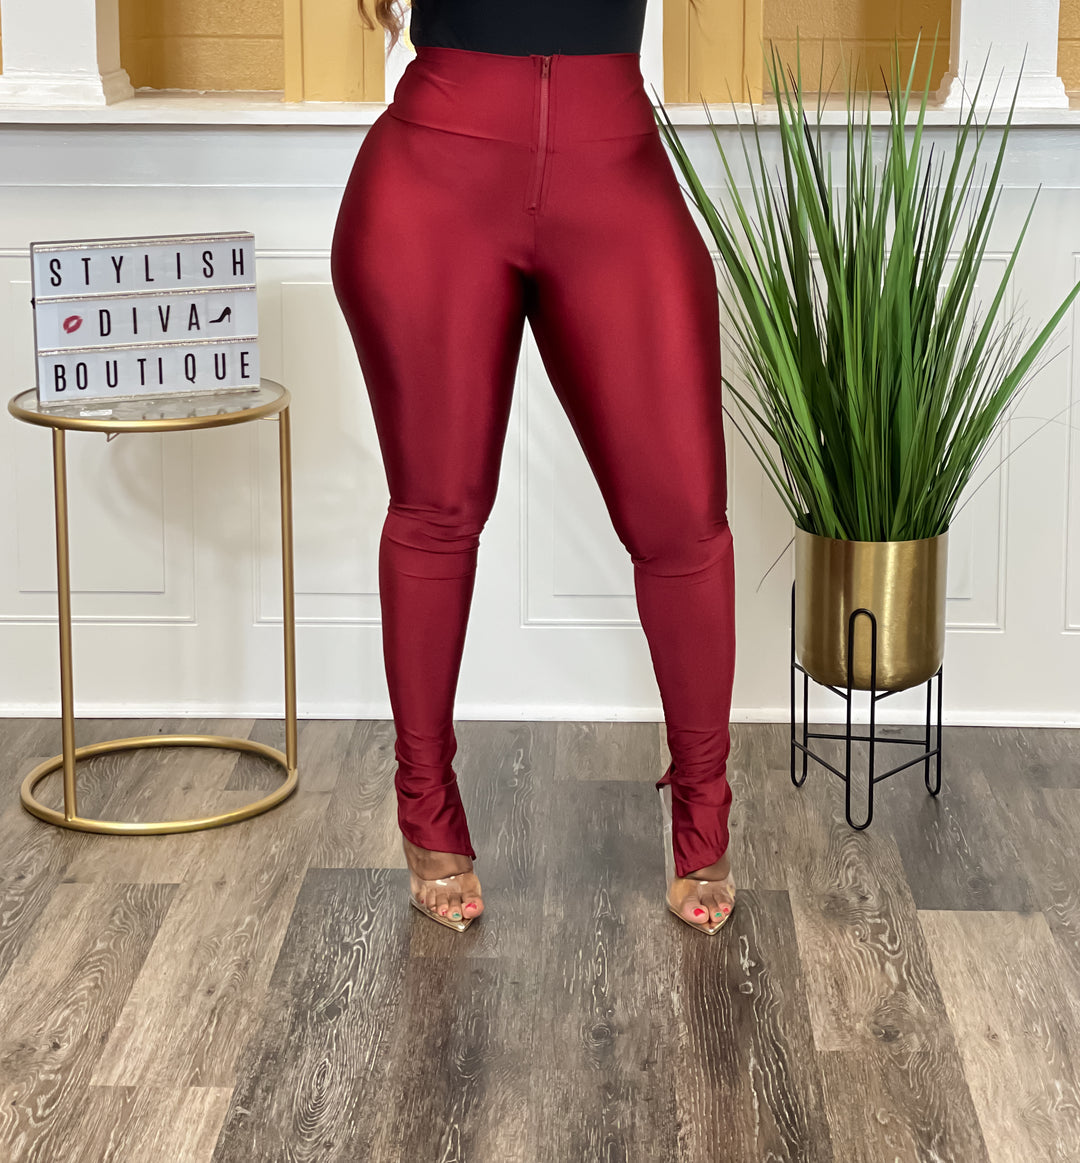 Renaissance Ready Ruched Leggings up to 3XL (Metallic Silver)